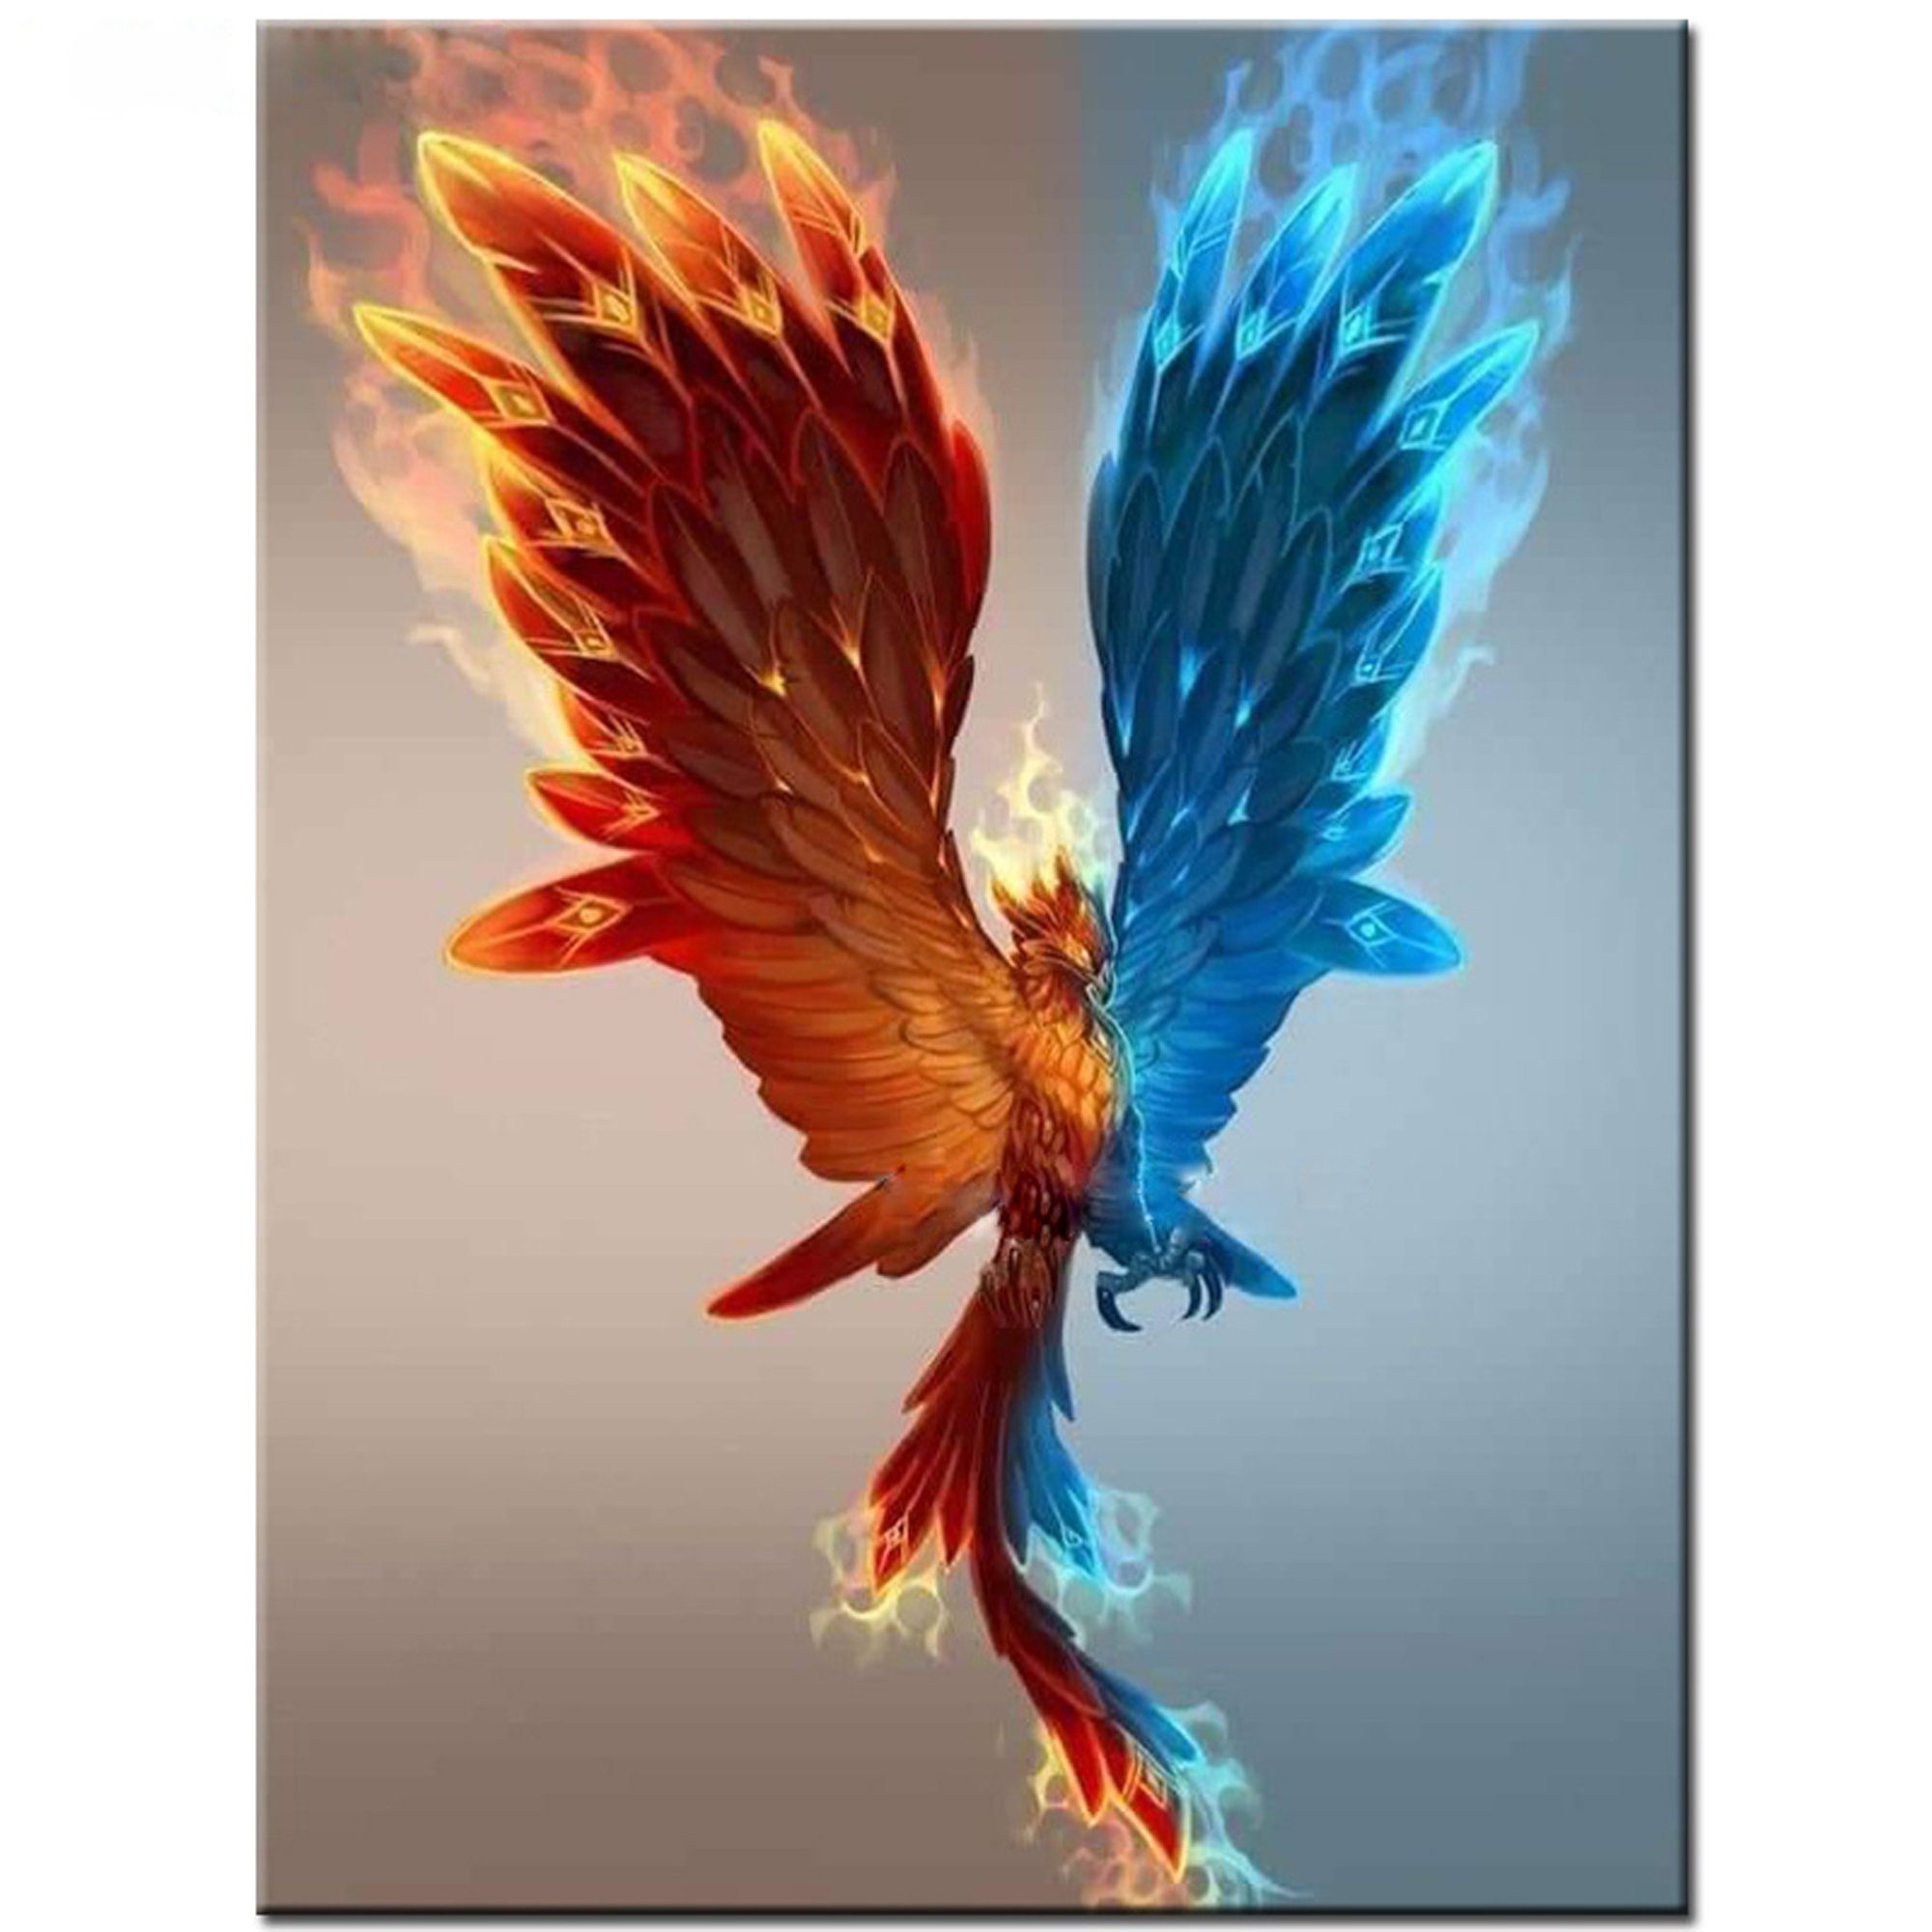 3D Feathers with Flying Birds Wall Décor Red Barrel Studio Finish: Blue, Design: Full Set